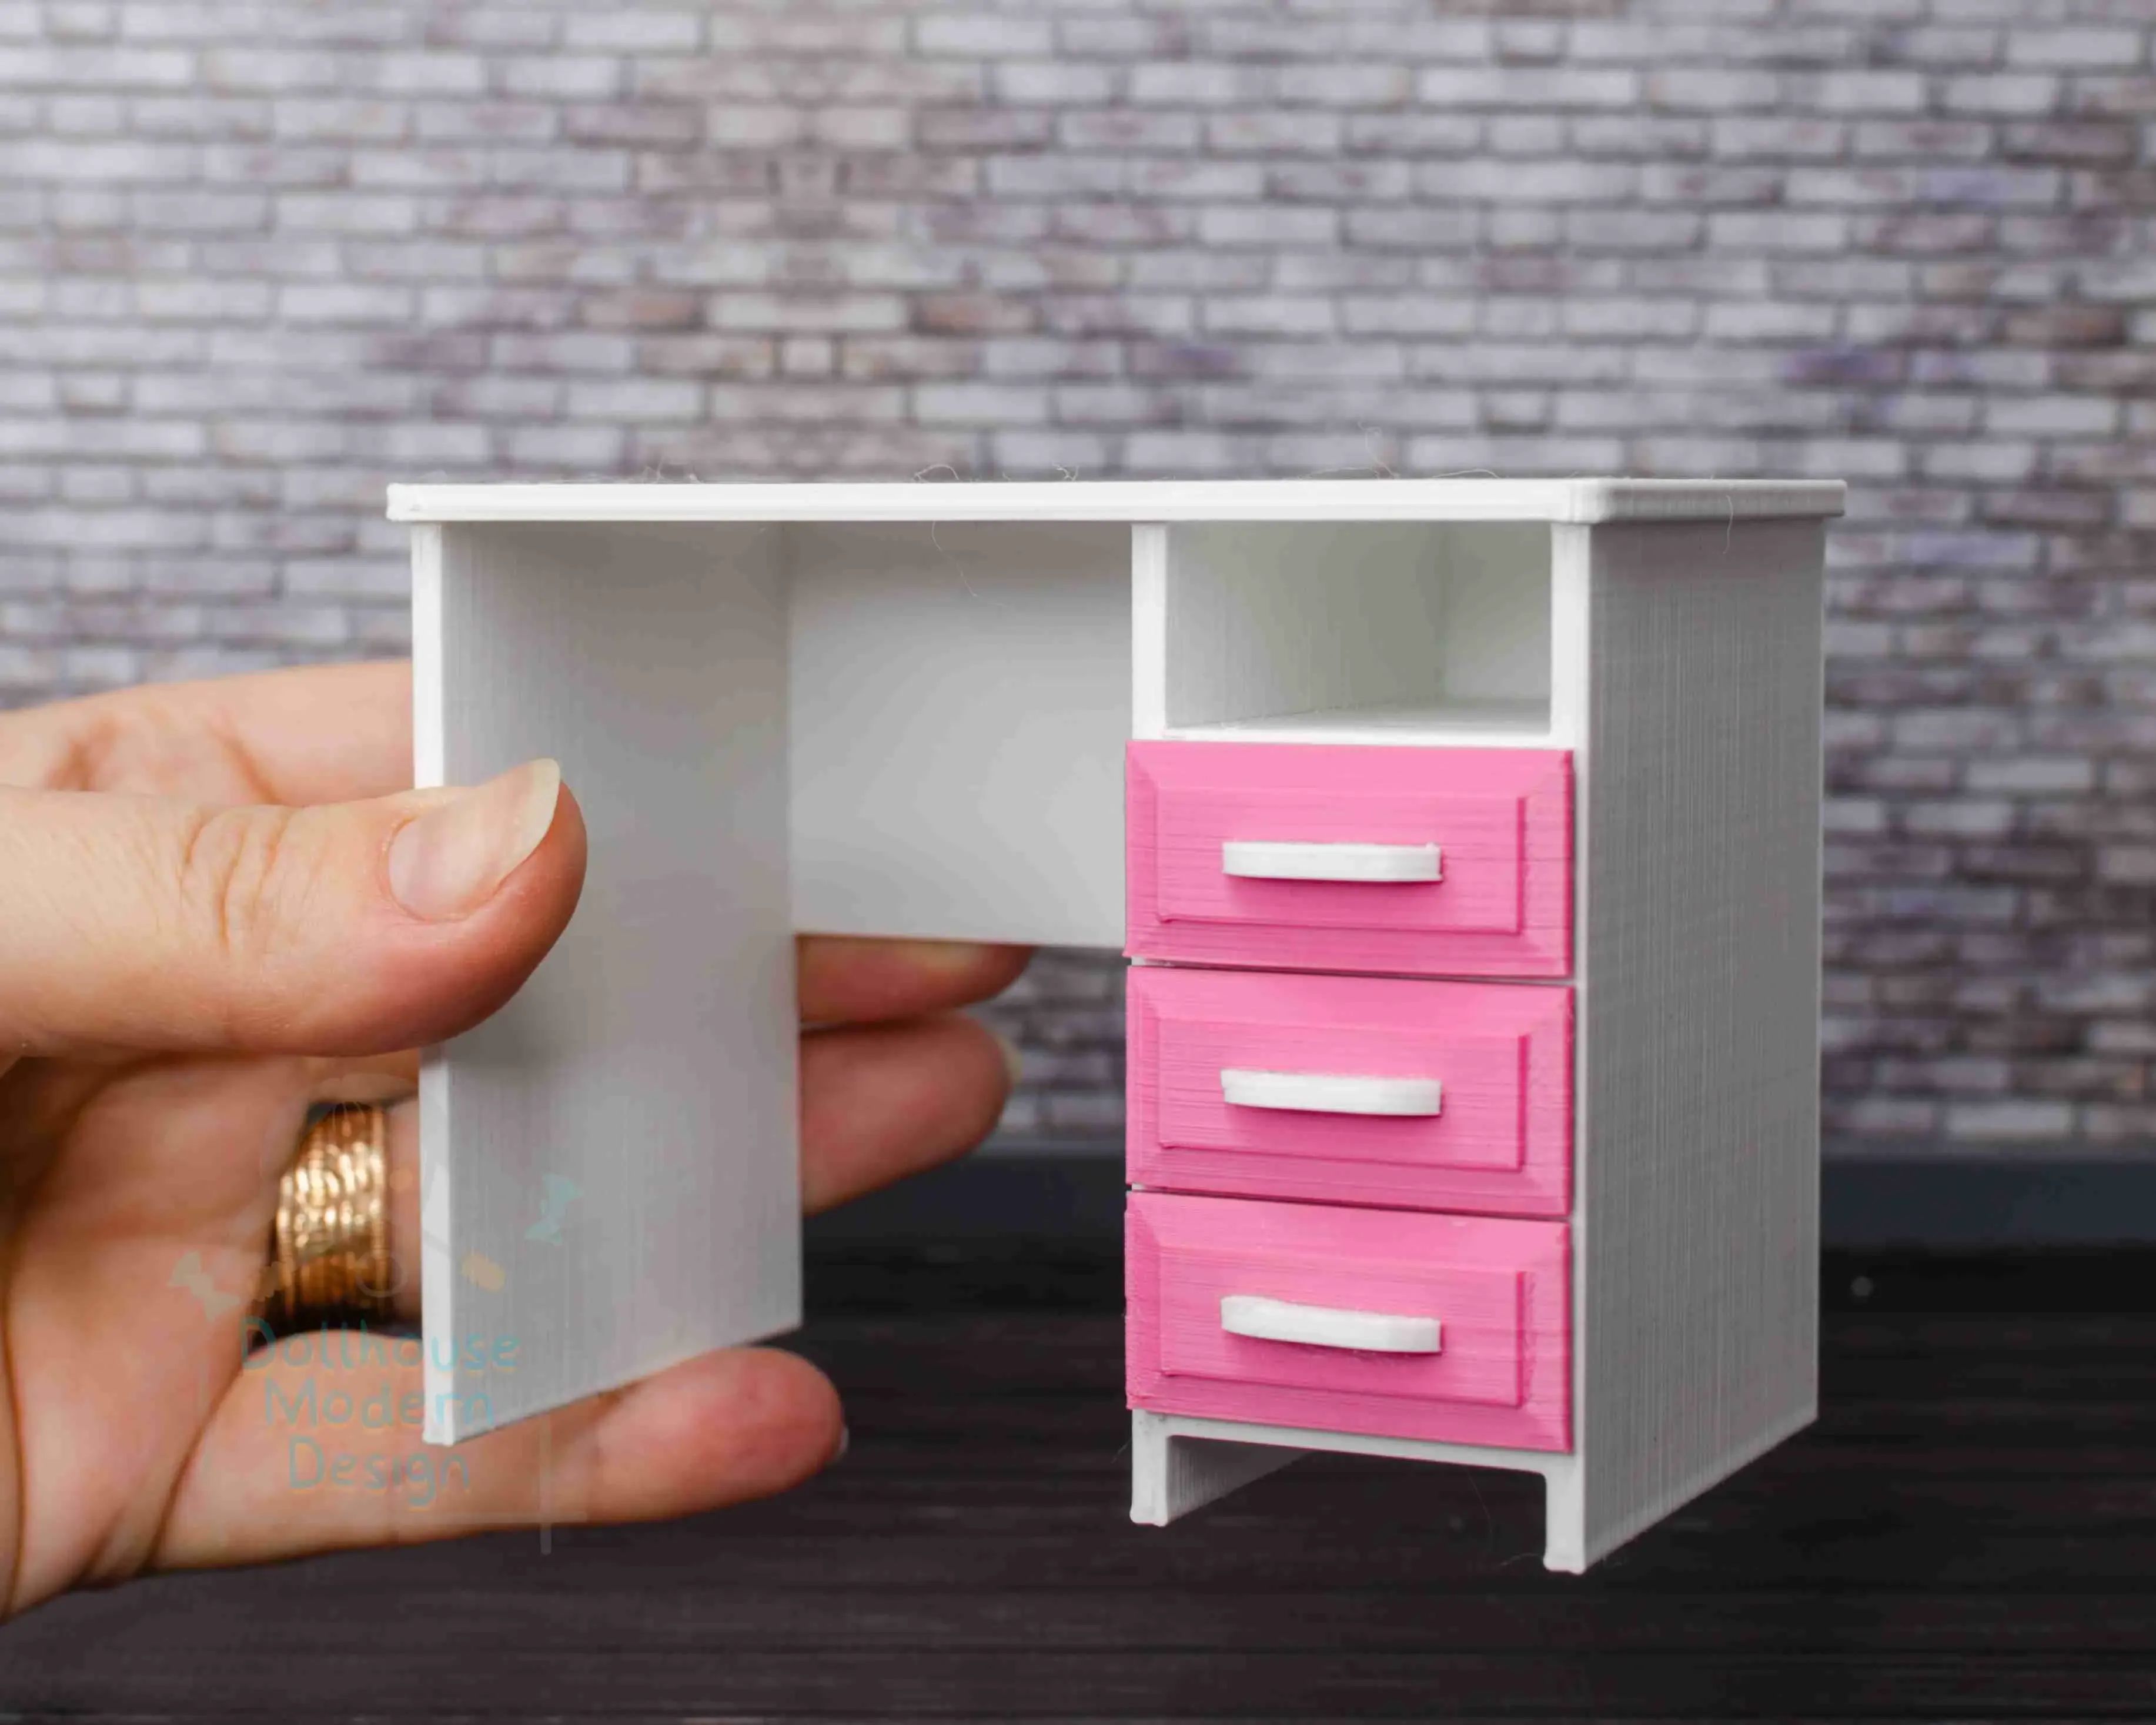 Dollhouse Desk with 3 drawers - STL files for 3D printing